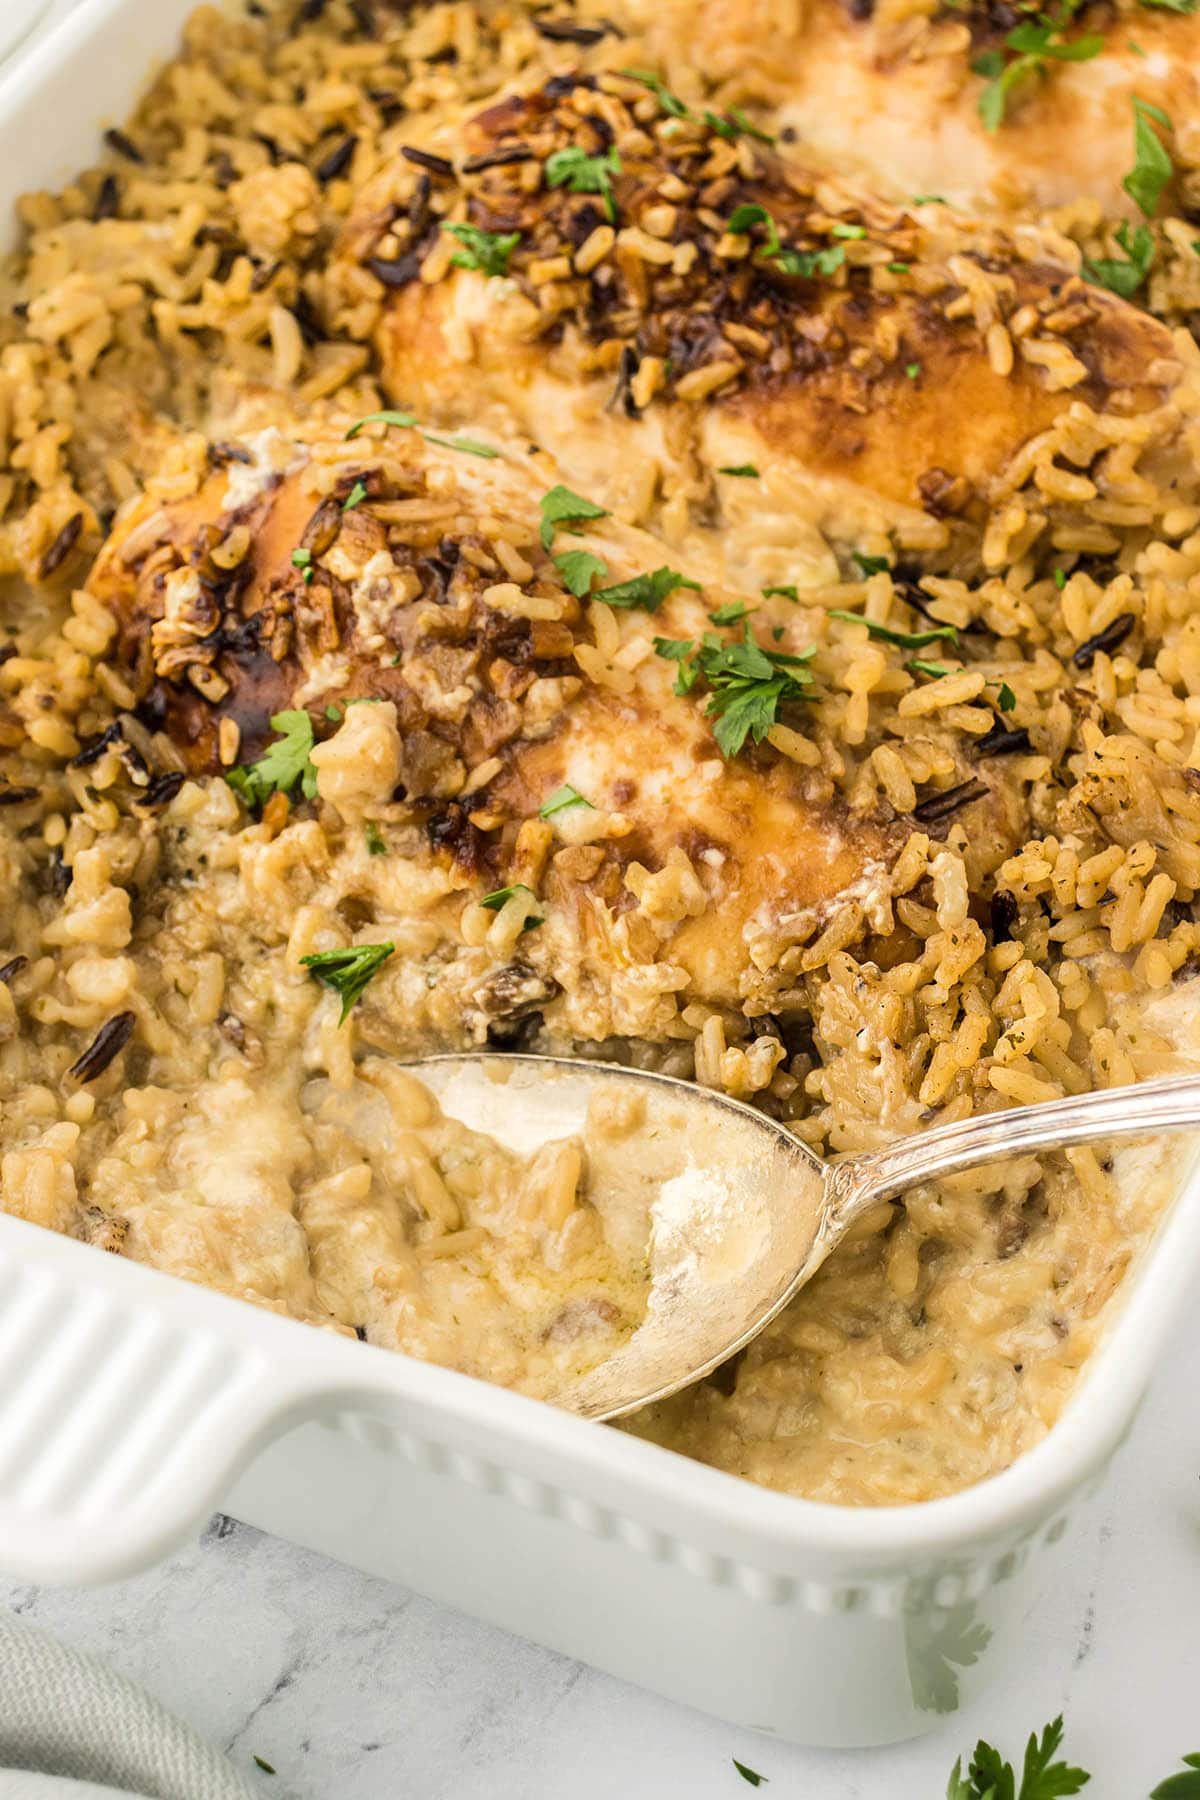 Baked chicken and rice in a casserole dish, with a serving spoon.